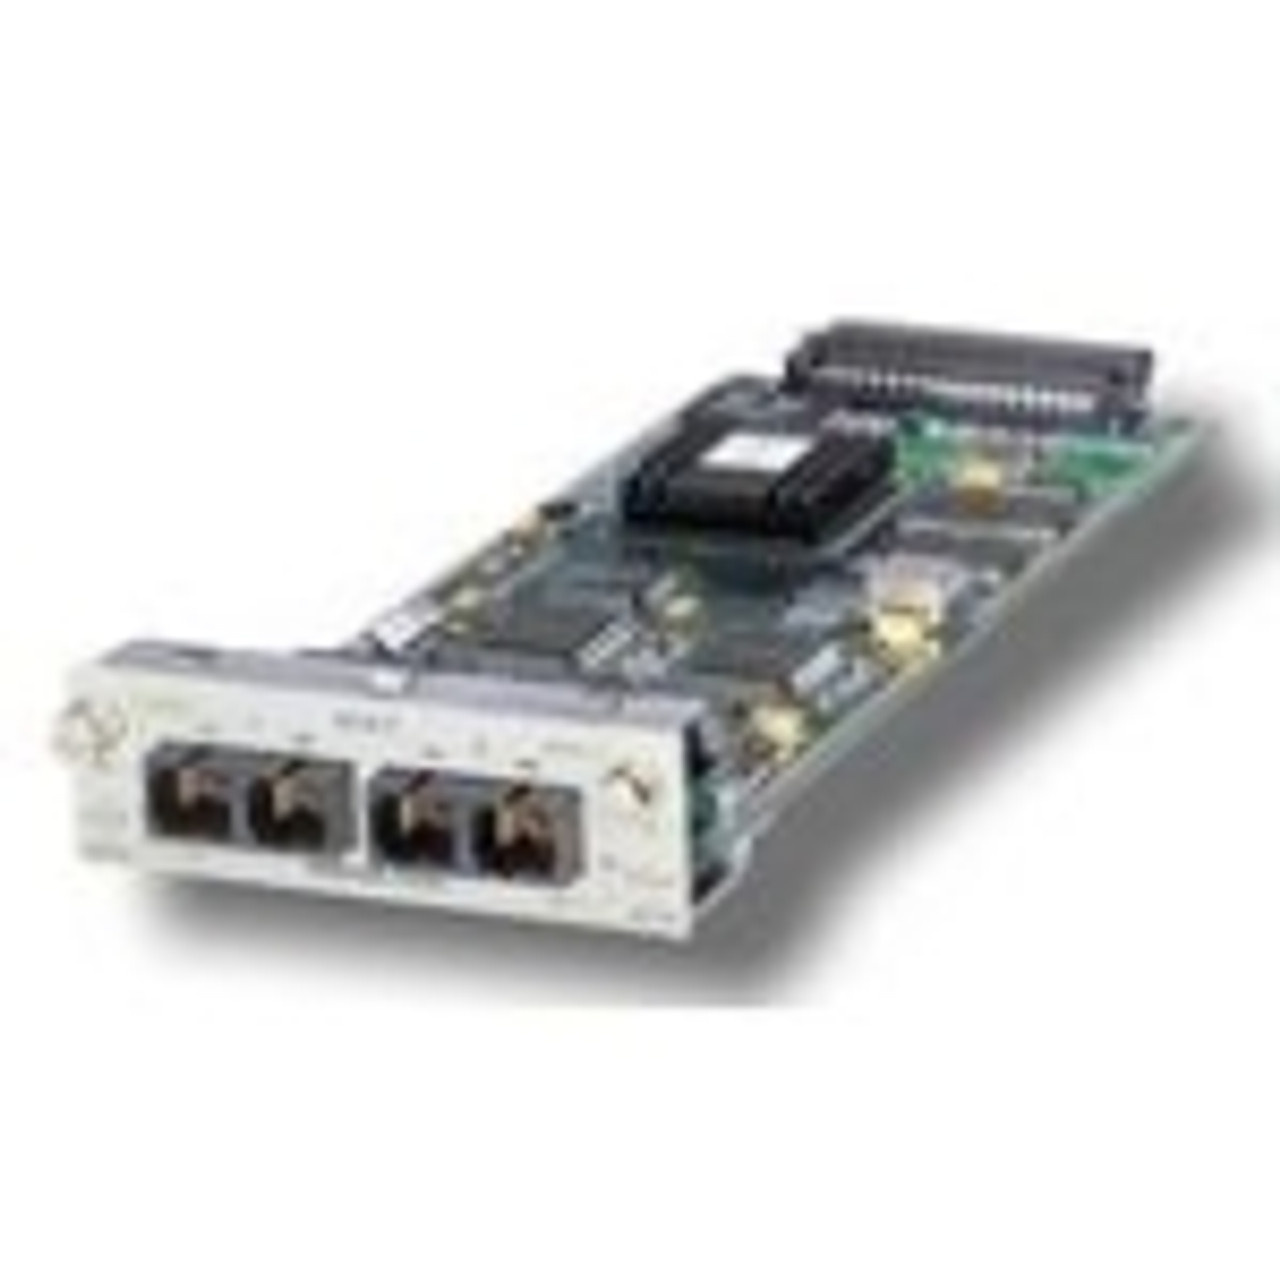 AT-A17 Allied Telesis AT-A17 100Base-FX Network Expansion Module 2 x 100Base-FX LAN Expansion Module